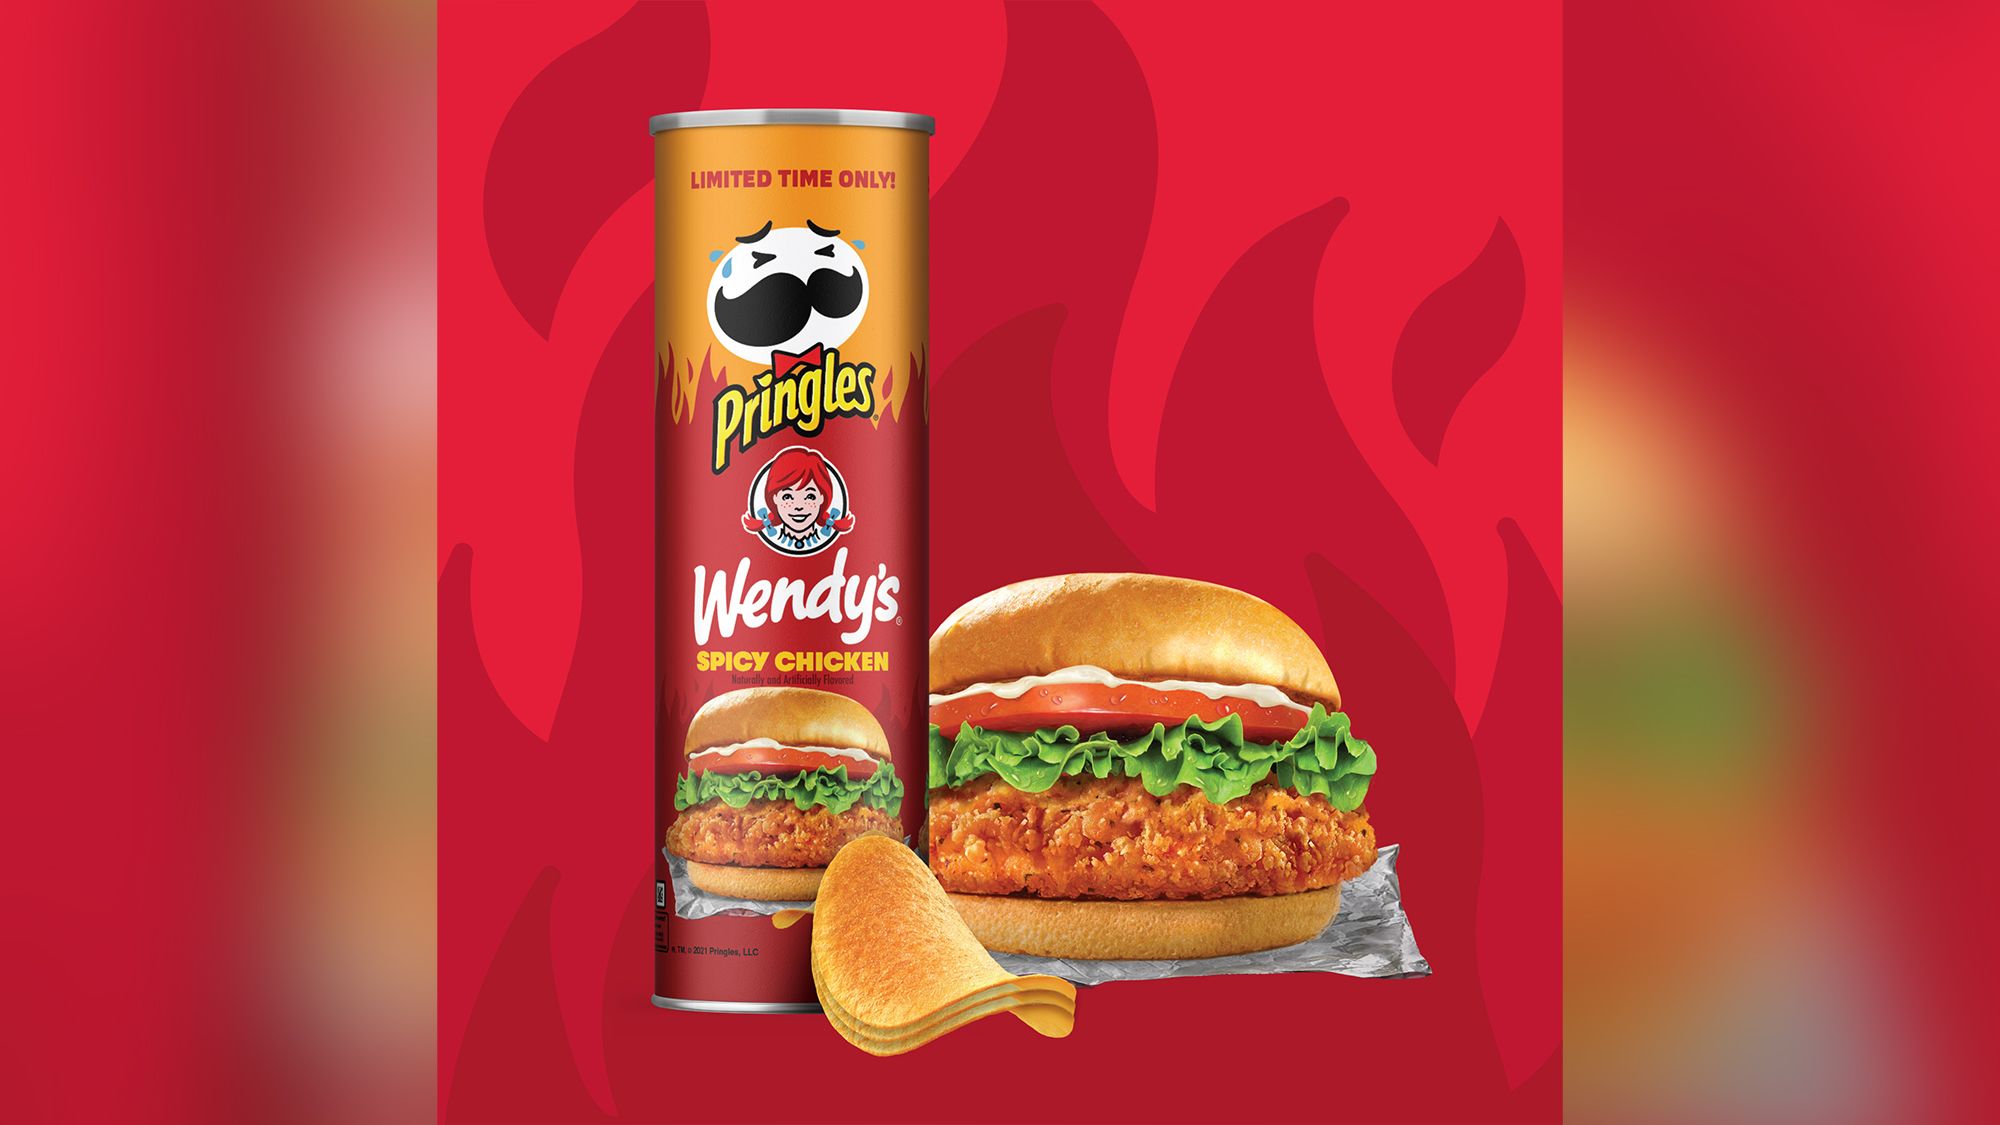 Pringles is entering the fried chicken sandwich wars with its new flavor